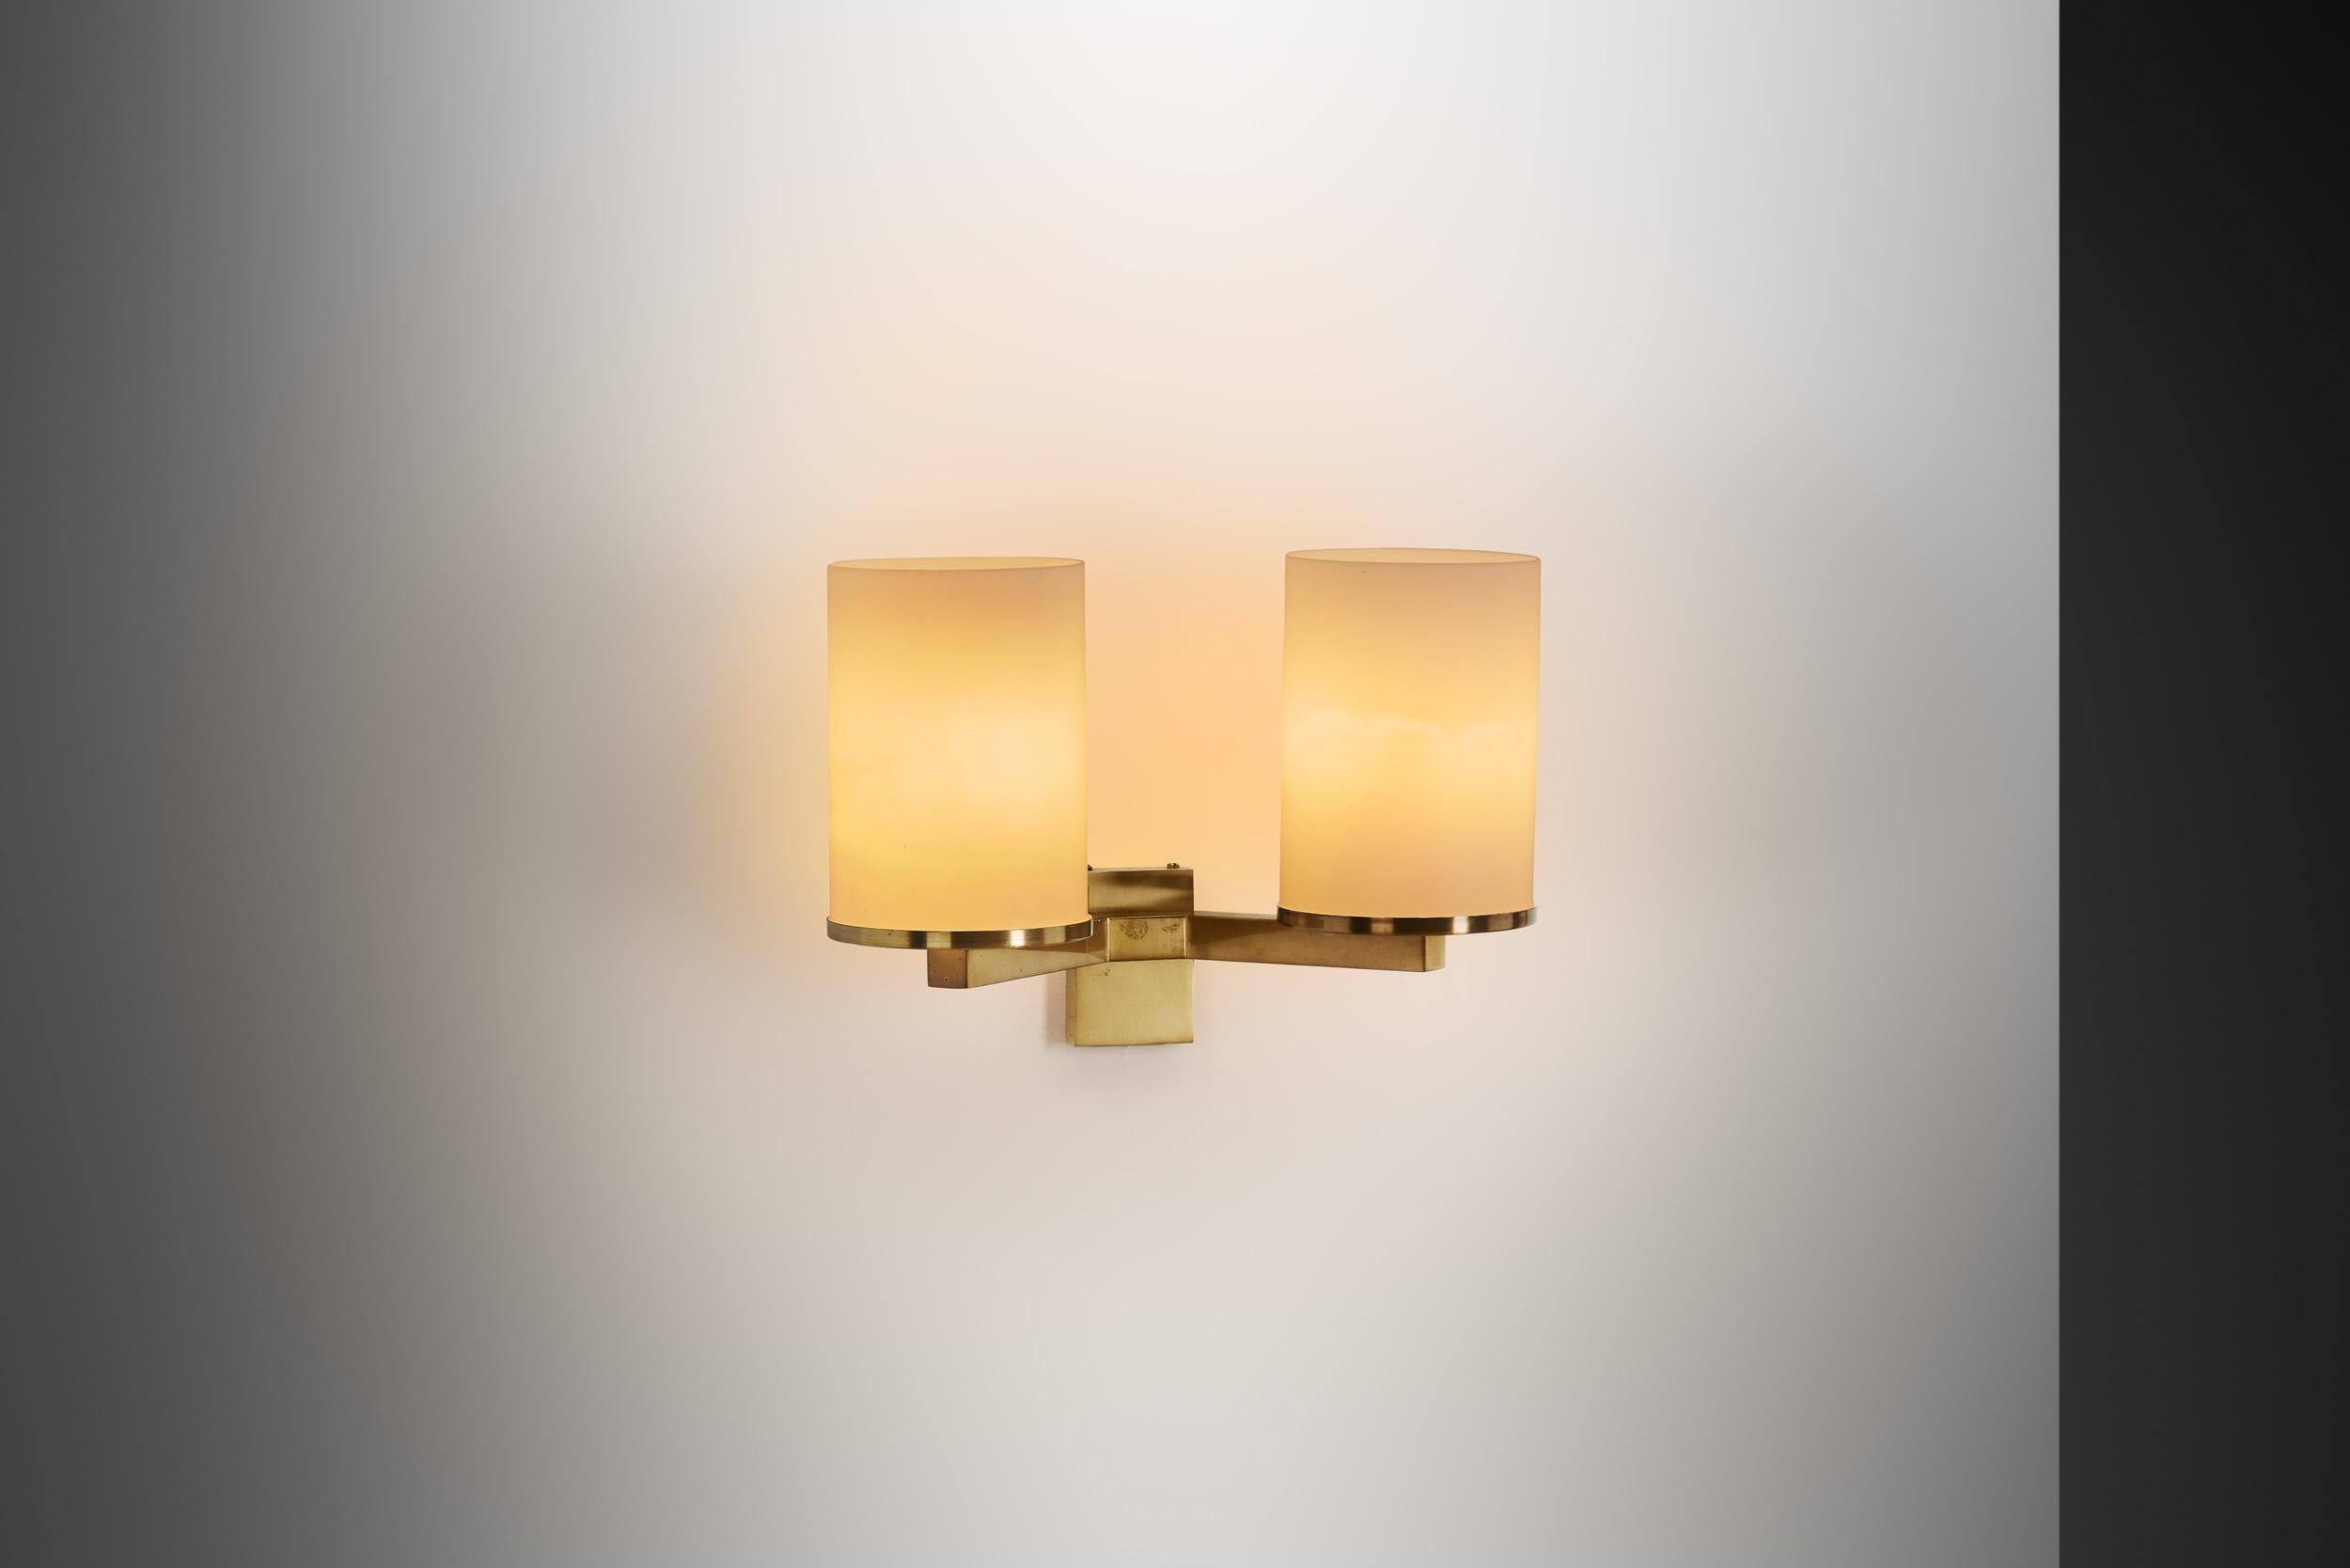 From 1920 to 1939, Art Deco revolutionized 20th century architecture and design. The period also gave birth to the Jean Perzel company, which would also make its mark on the world of lighting and design. Jean Perzel’s light fixtures and furniture in